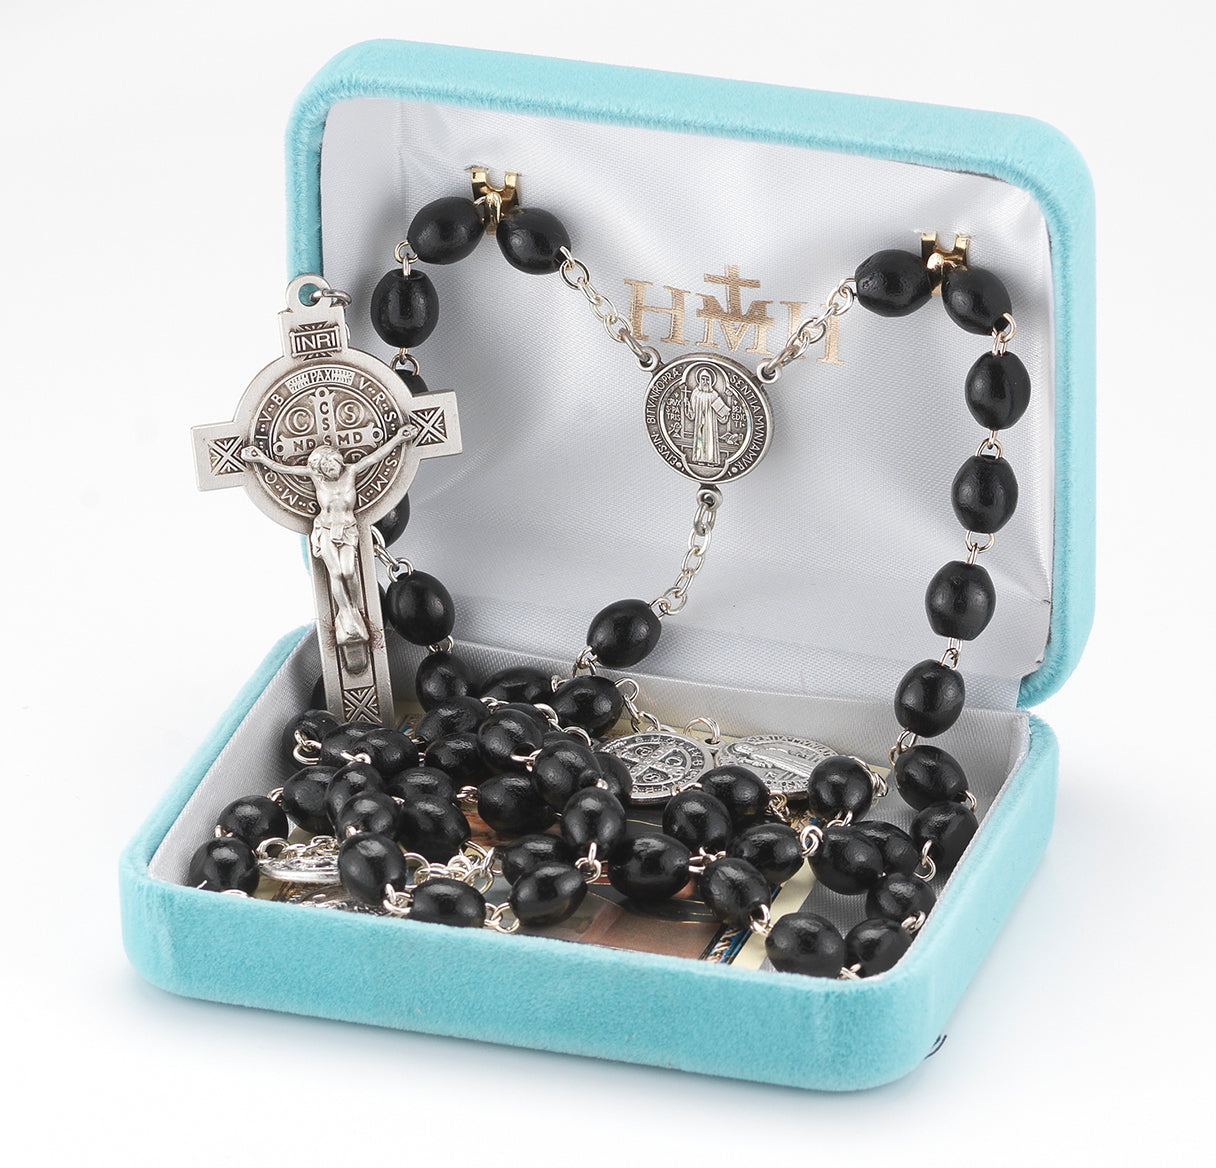 Saint Benedict Black Polished Boxwood Jubilee Rosary Sterling Crucifix and Centerpiece